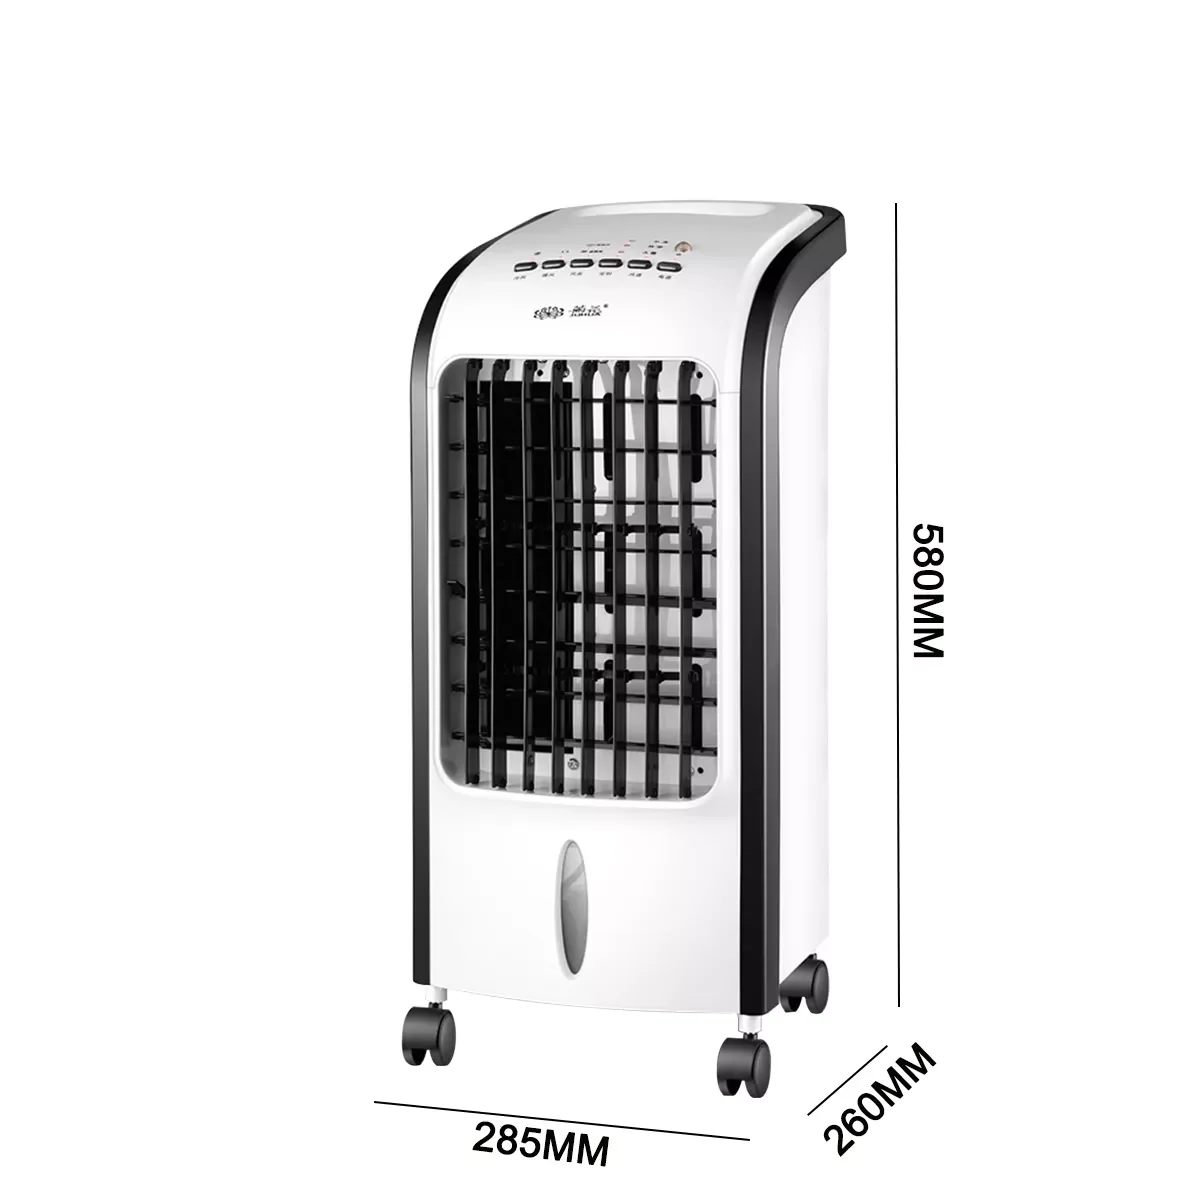 Portable Air Conditioner Conditioning Fan Humidifier 220V Home Electric Cooler Ventilator Mini Air Conditioner Cooling Fan enlarge